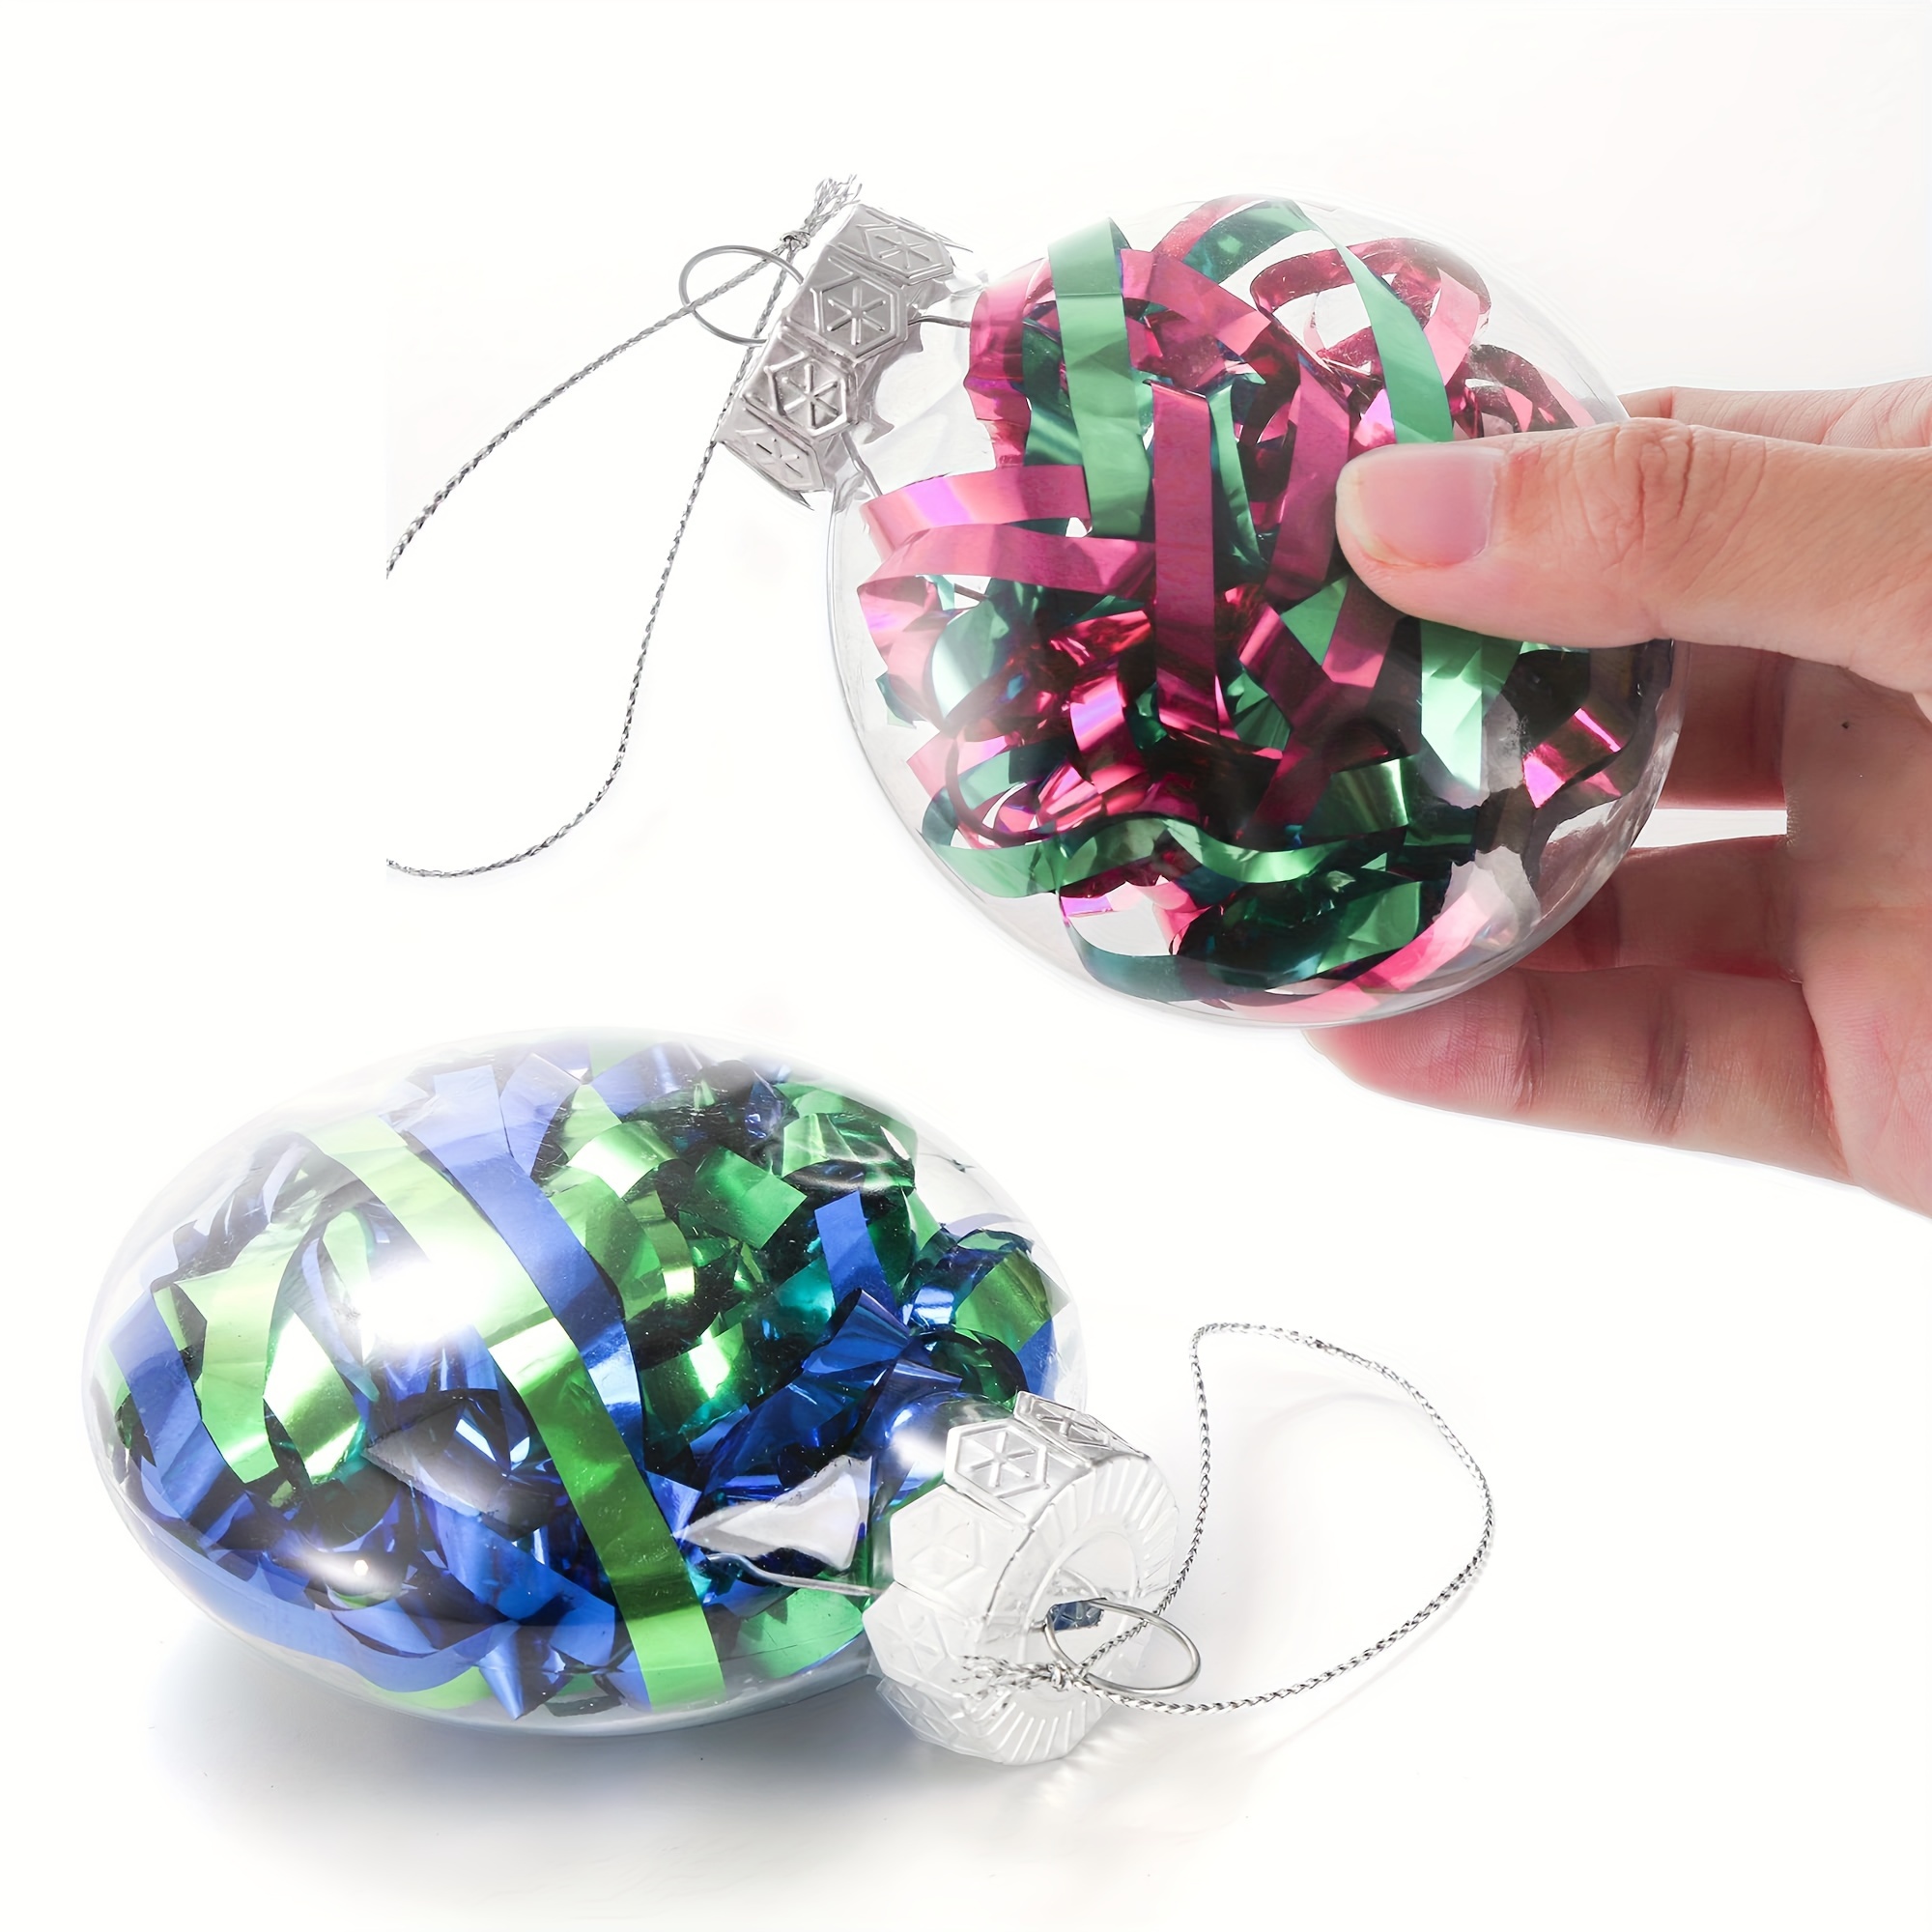 40 Pack Clear Fillable Ornaments Balls,Clear Plastic Christmas Ornaments,Craft Plastic Ball Ornament with 3 Size for Christmas,Wedding,DIY Craft